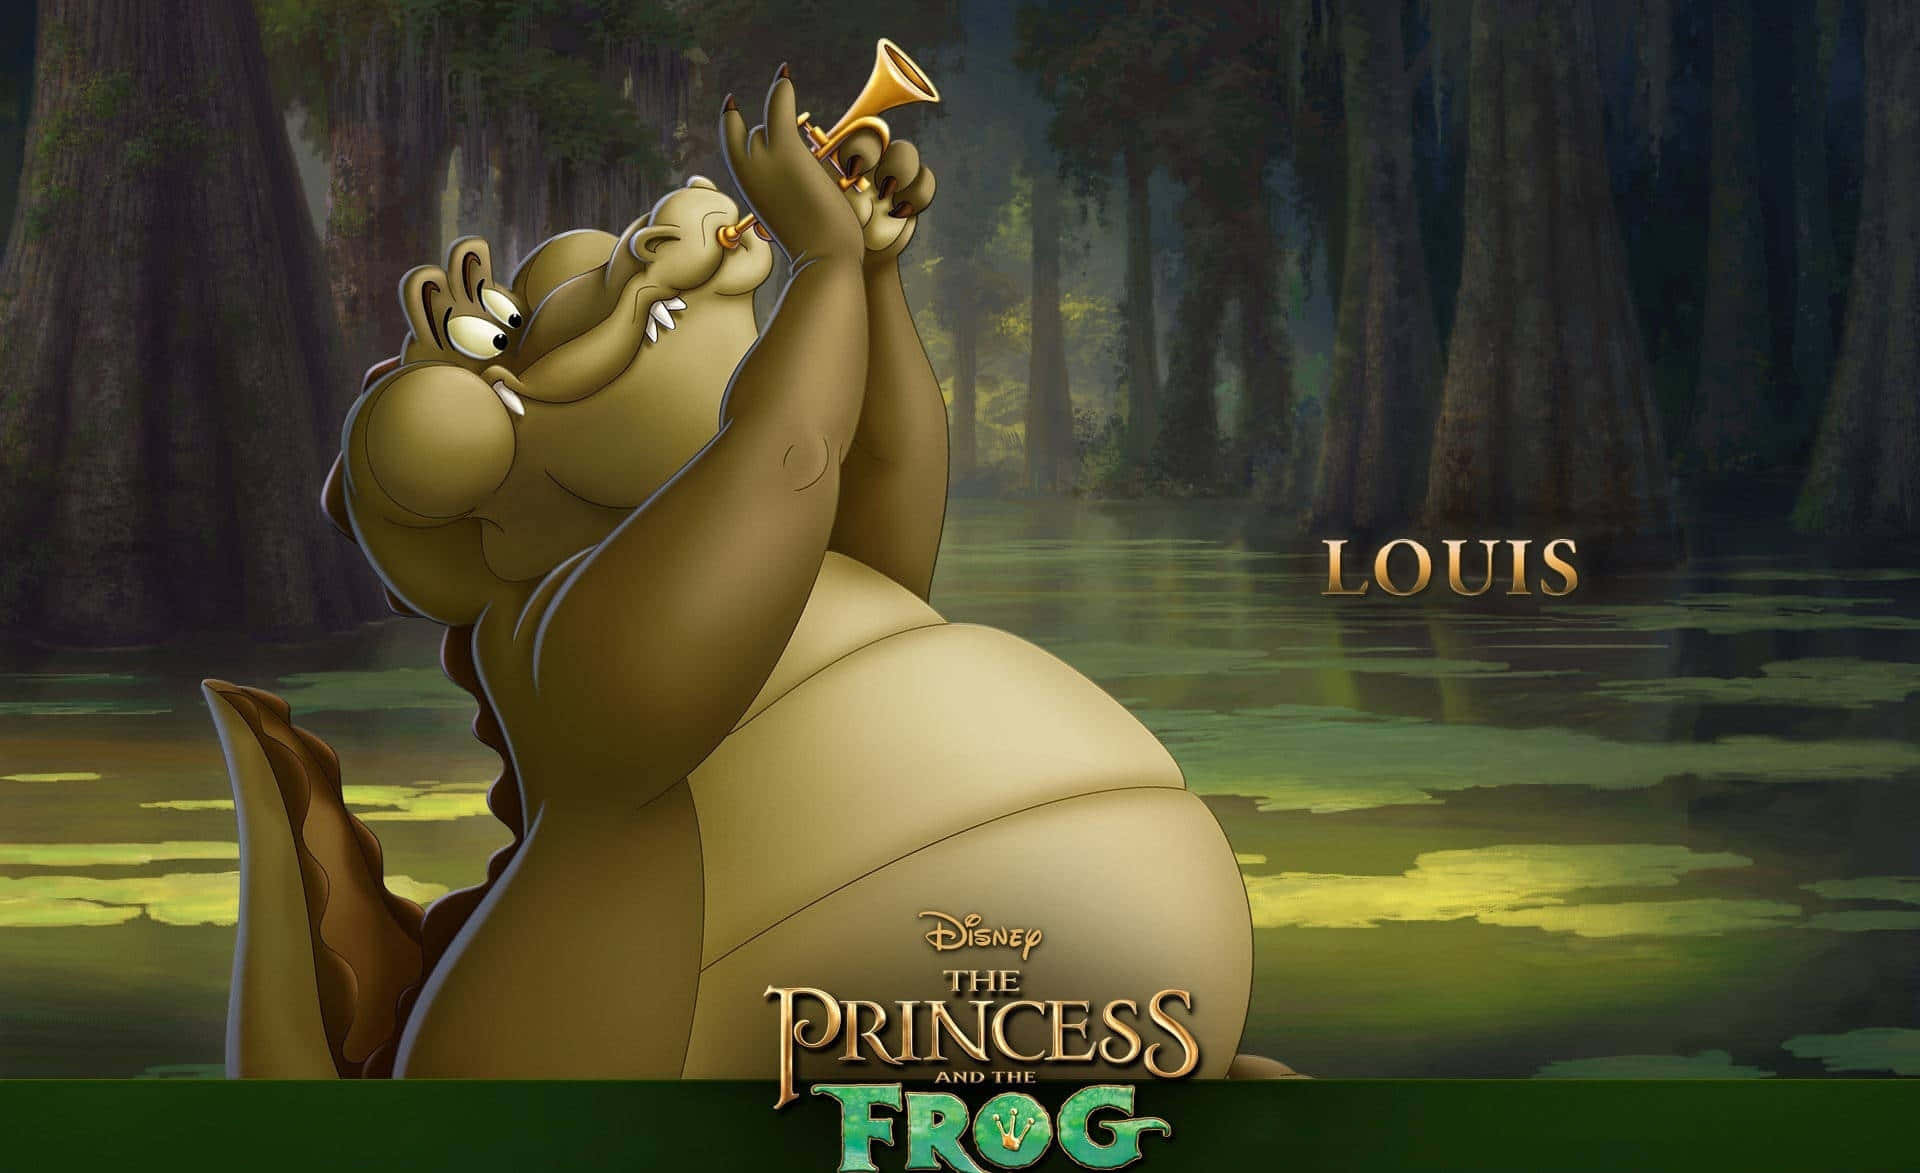 "The beloved Disney movie Princess and the Frog comes to life on the big screen."